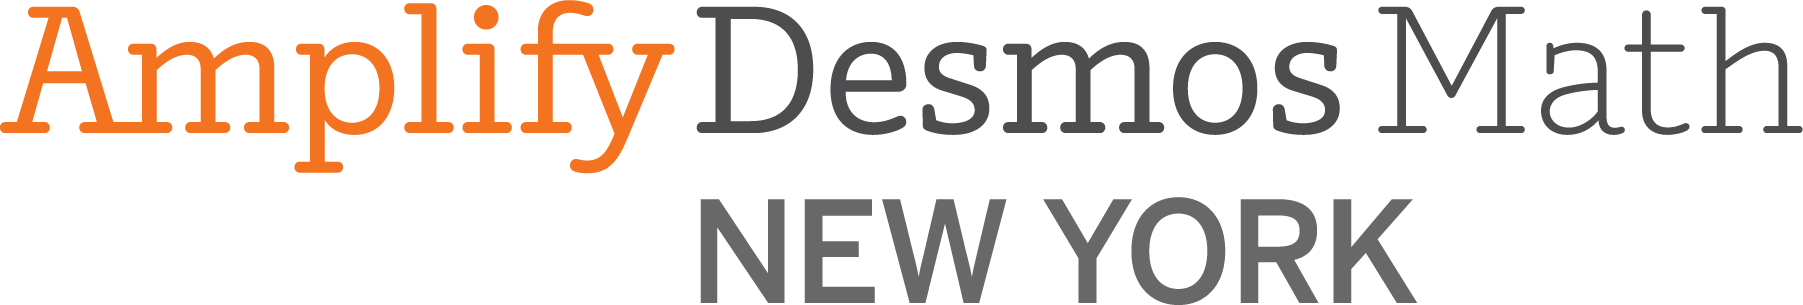 Logo of amplify desmos math new york featuring stylized text in orange and gray.